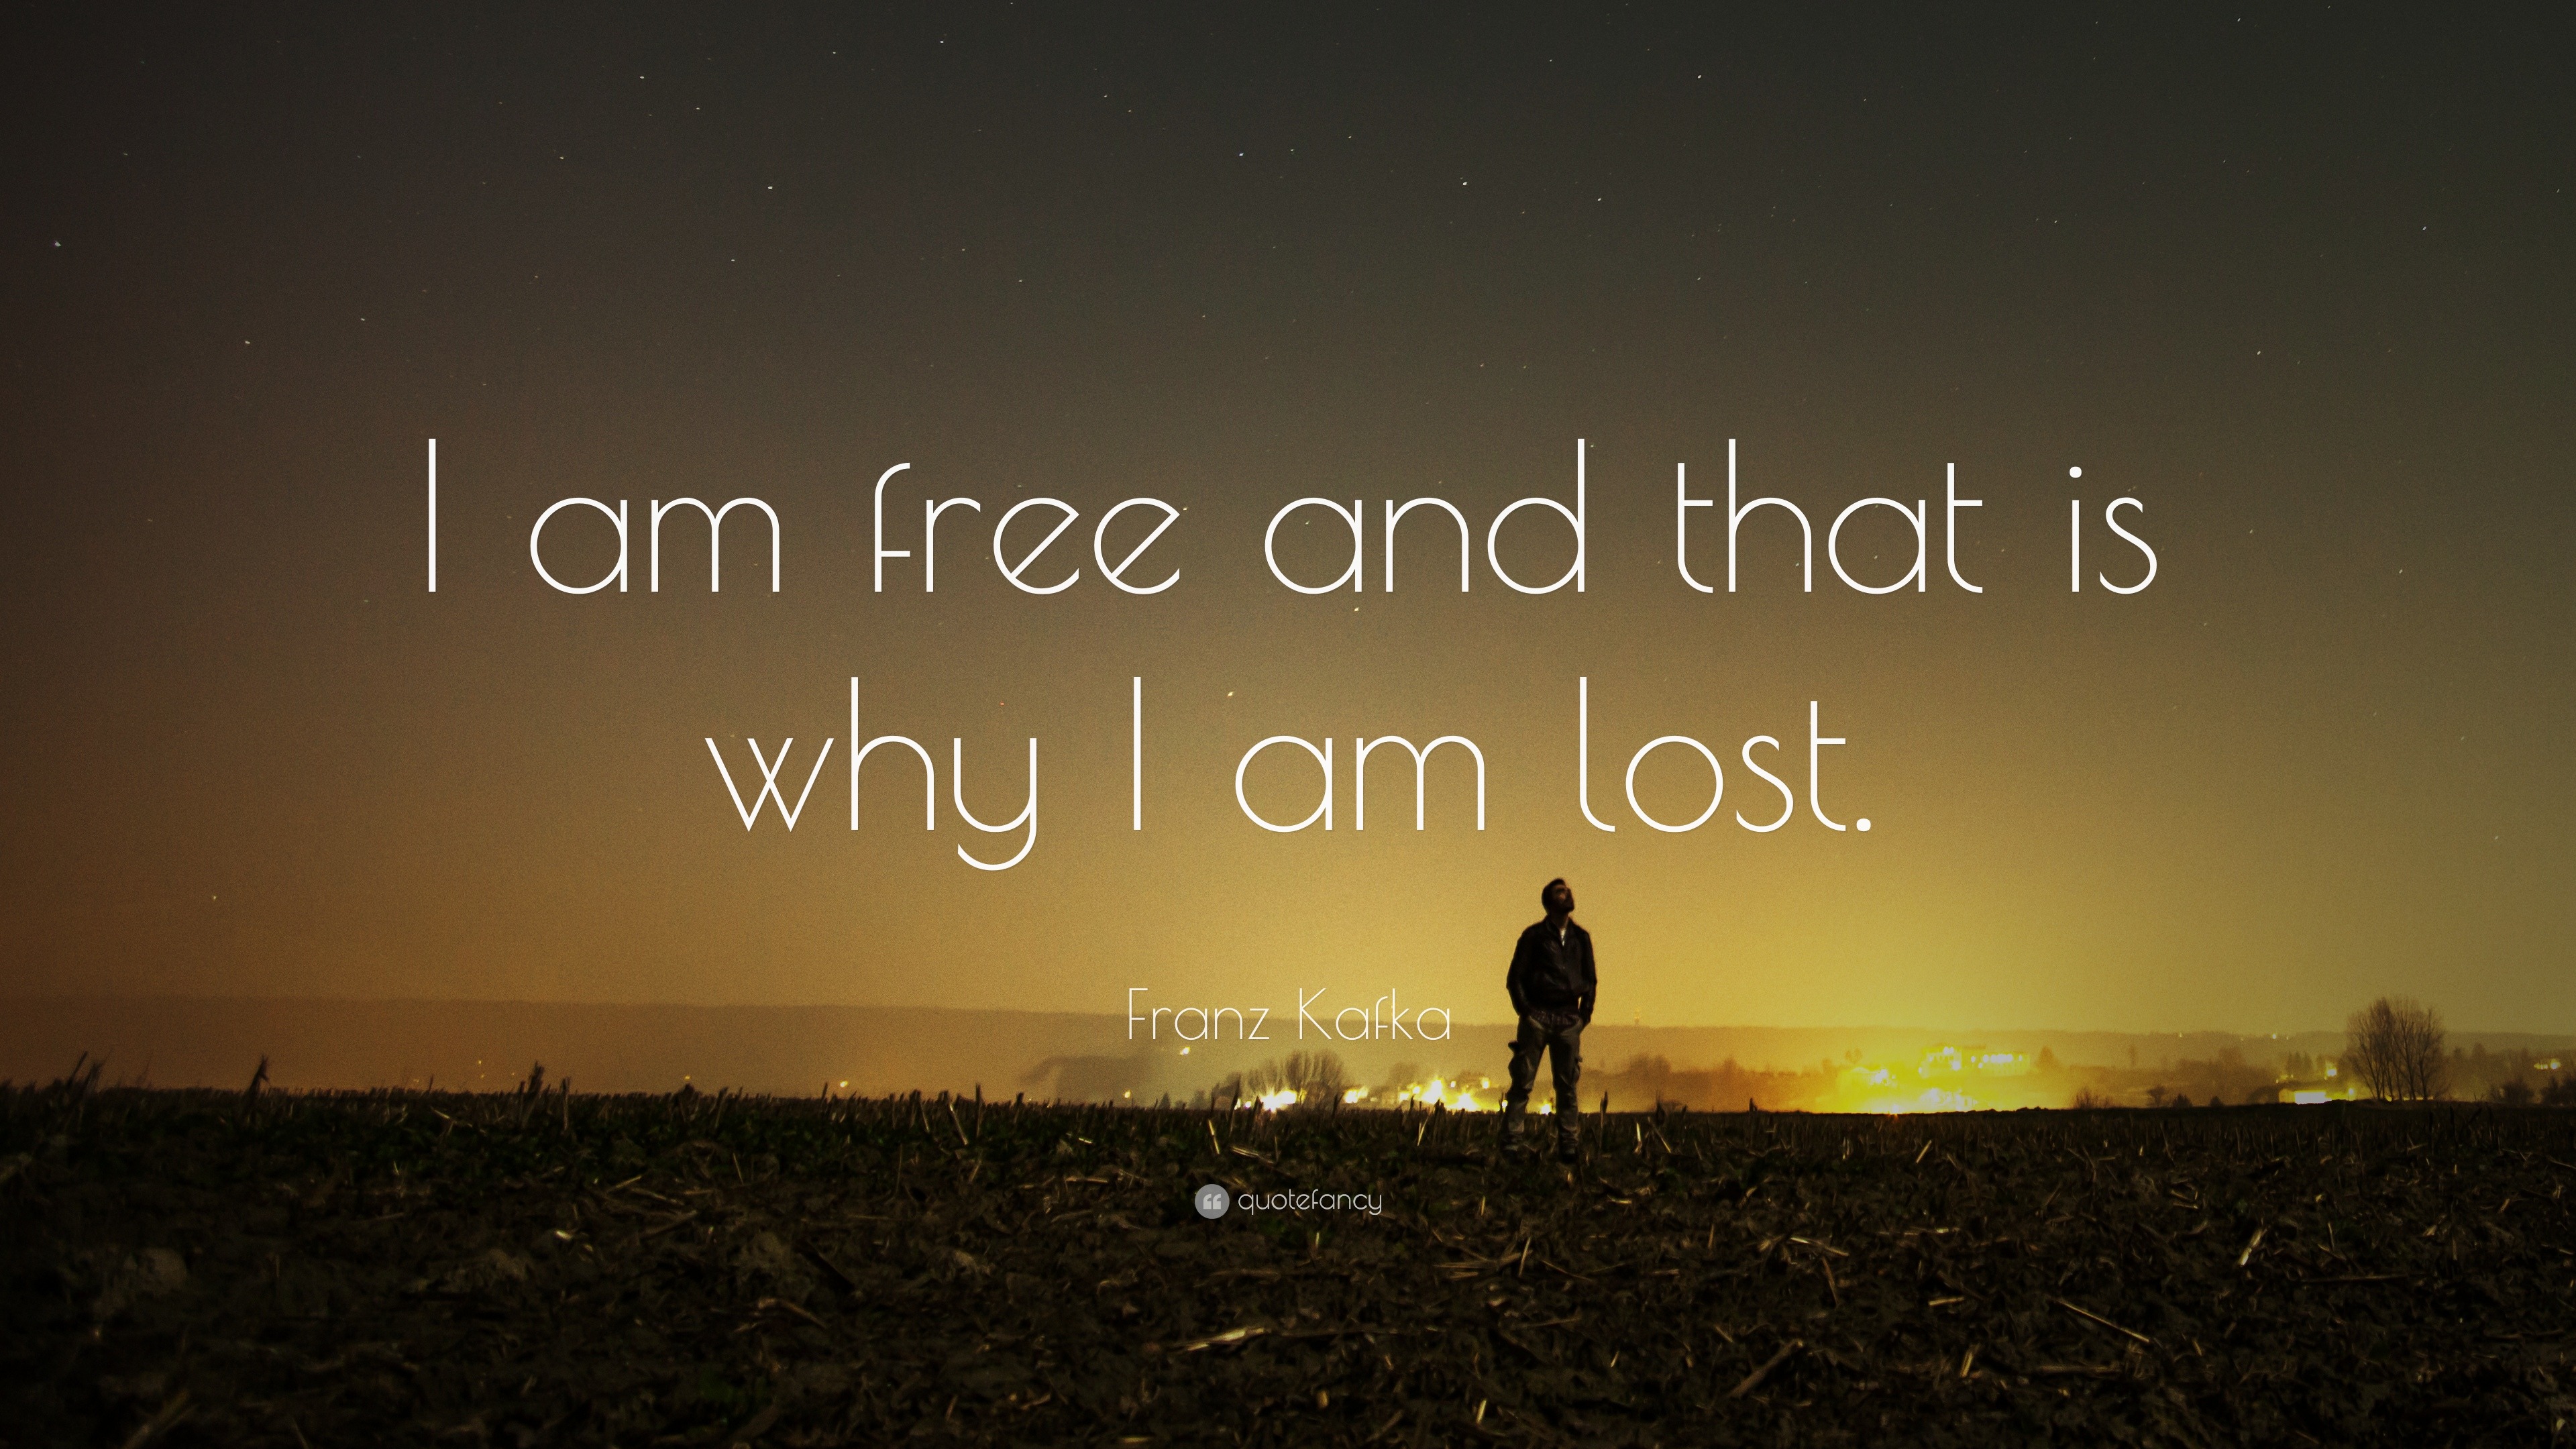 Franz Kafka Quote: “I am free and that is why I am lost.”